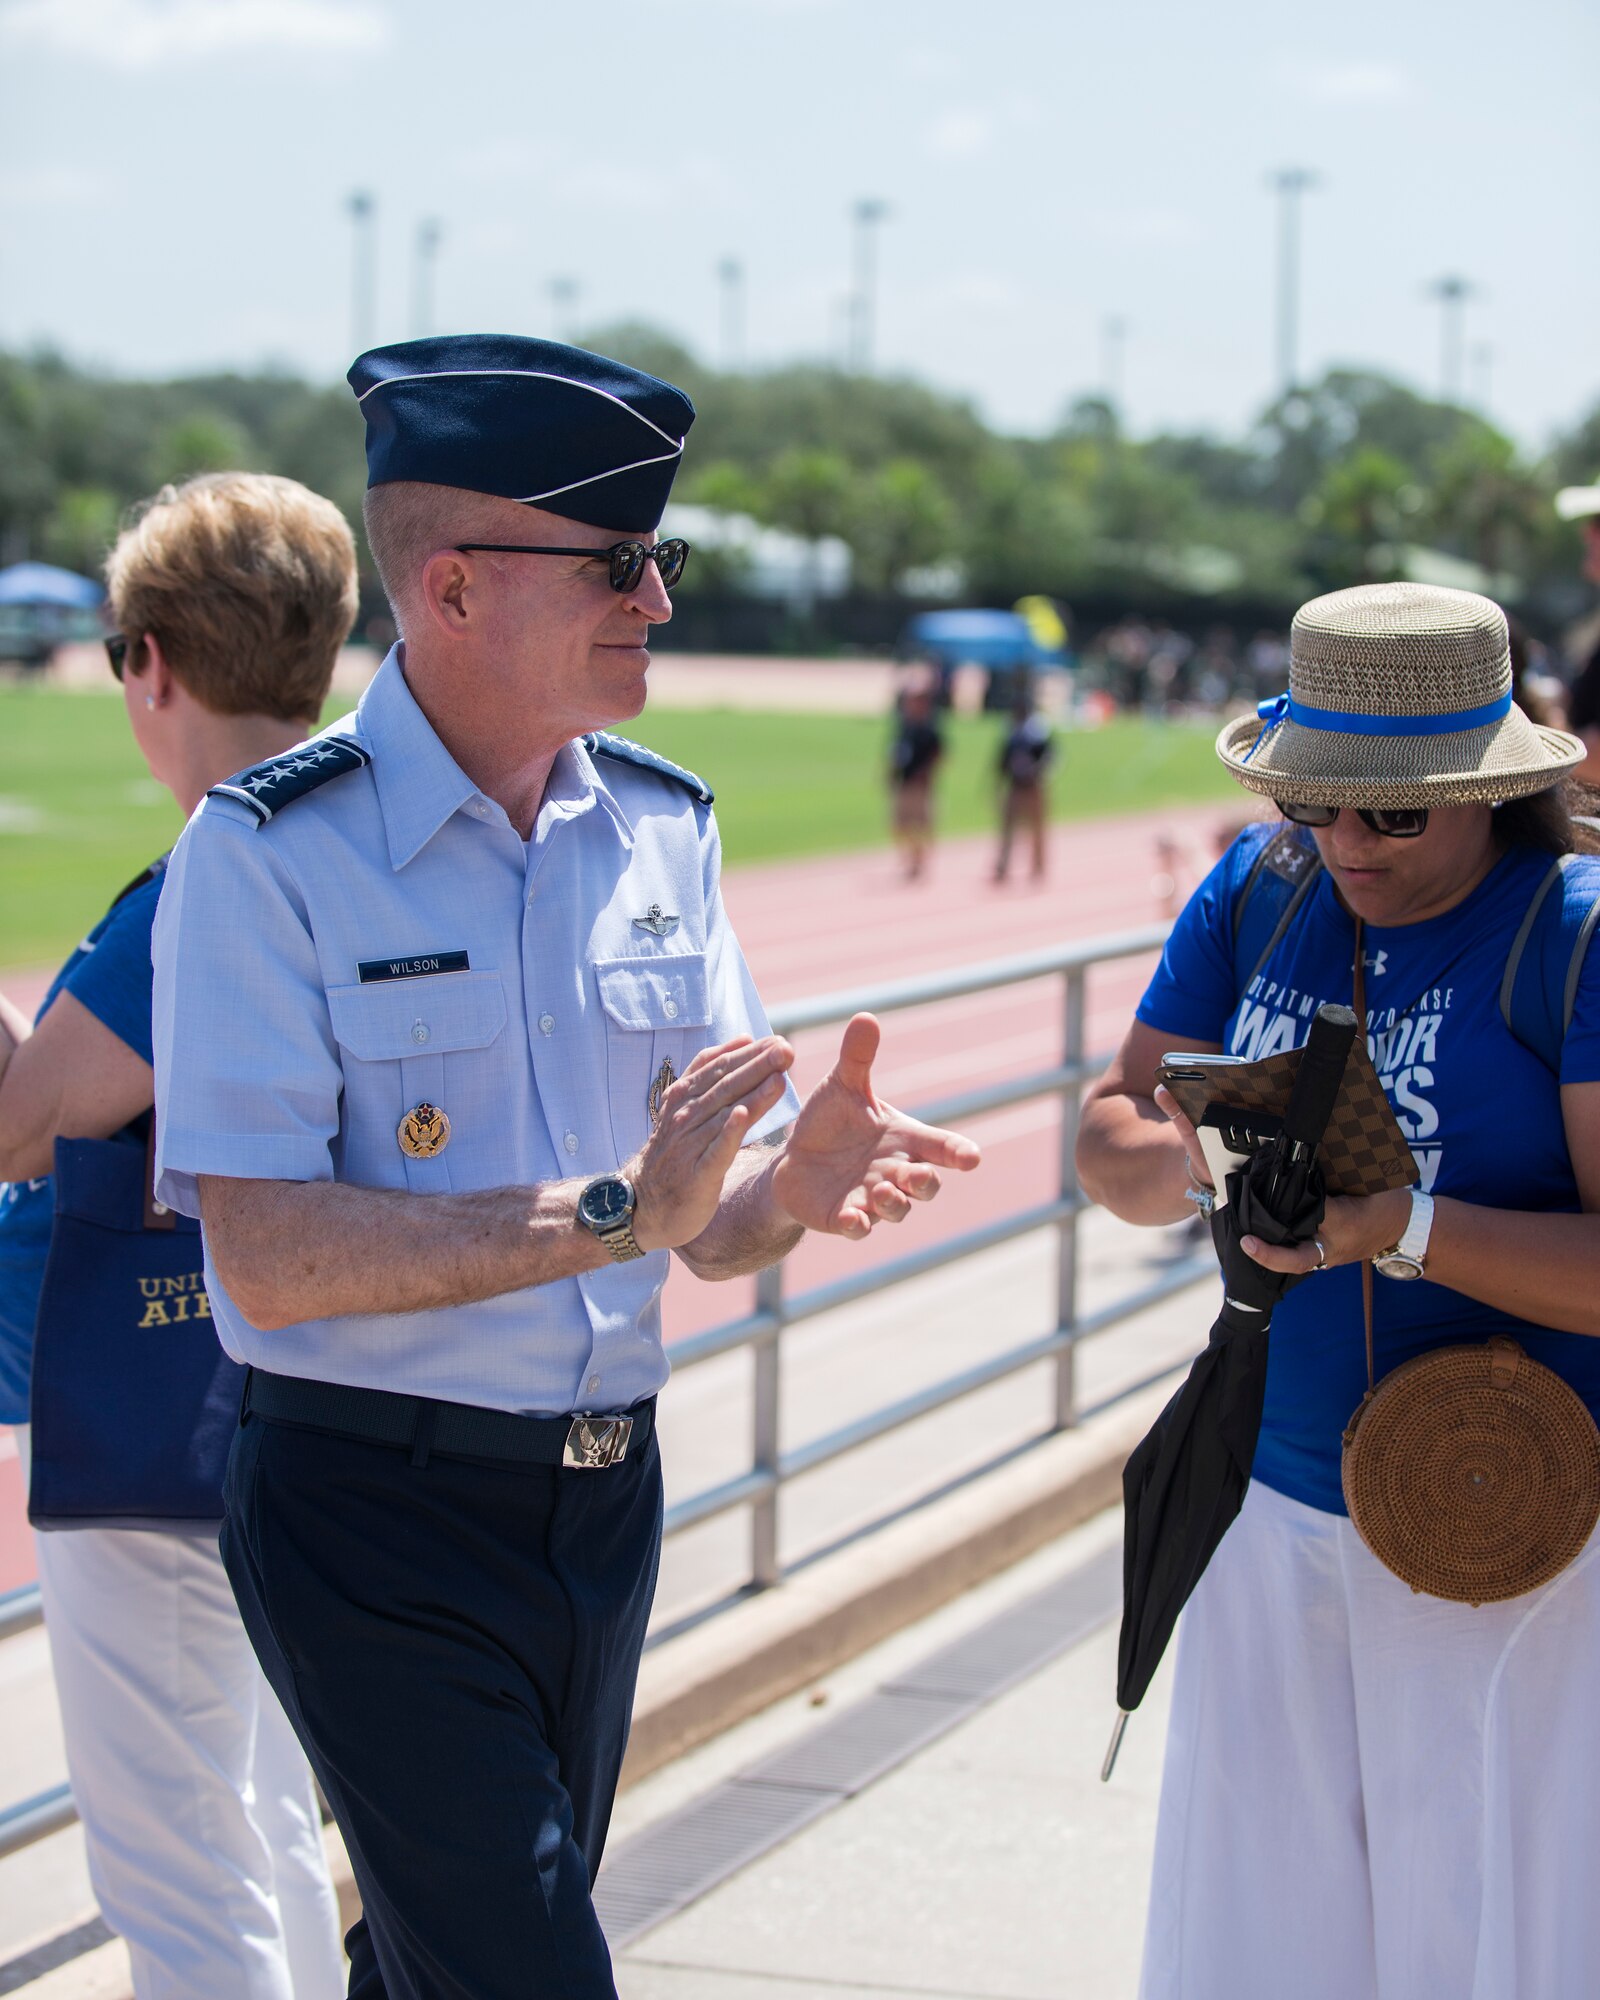 U.S. Air Force Gen. Stephen W. Wilson, Vice Chief of Staff of the Air Force, attends an event at the Department of Defense Warrior Games, Tampa, Fla., June 23, 2019.